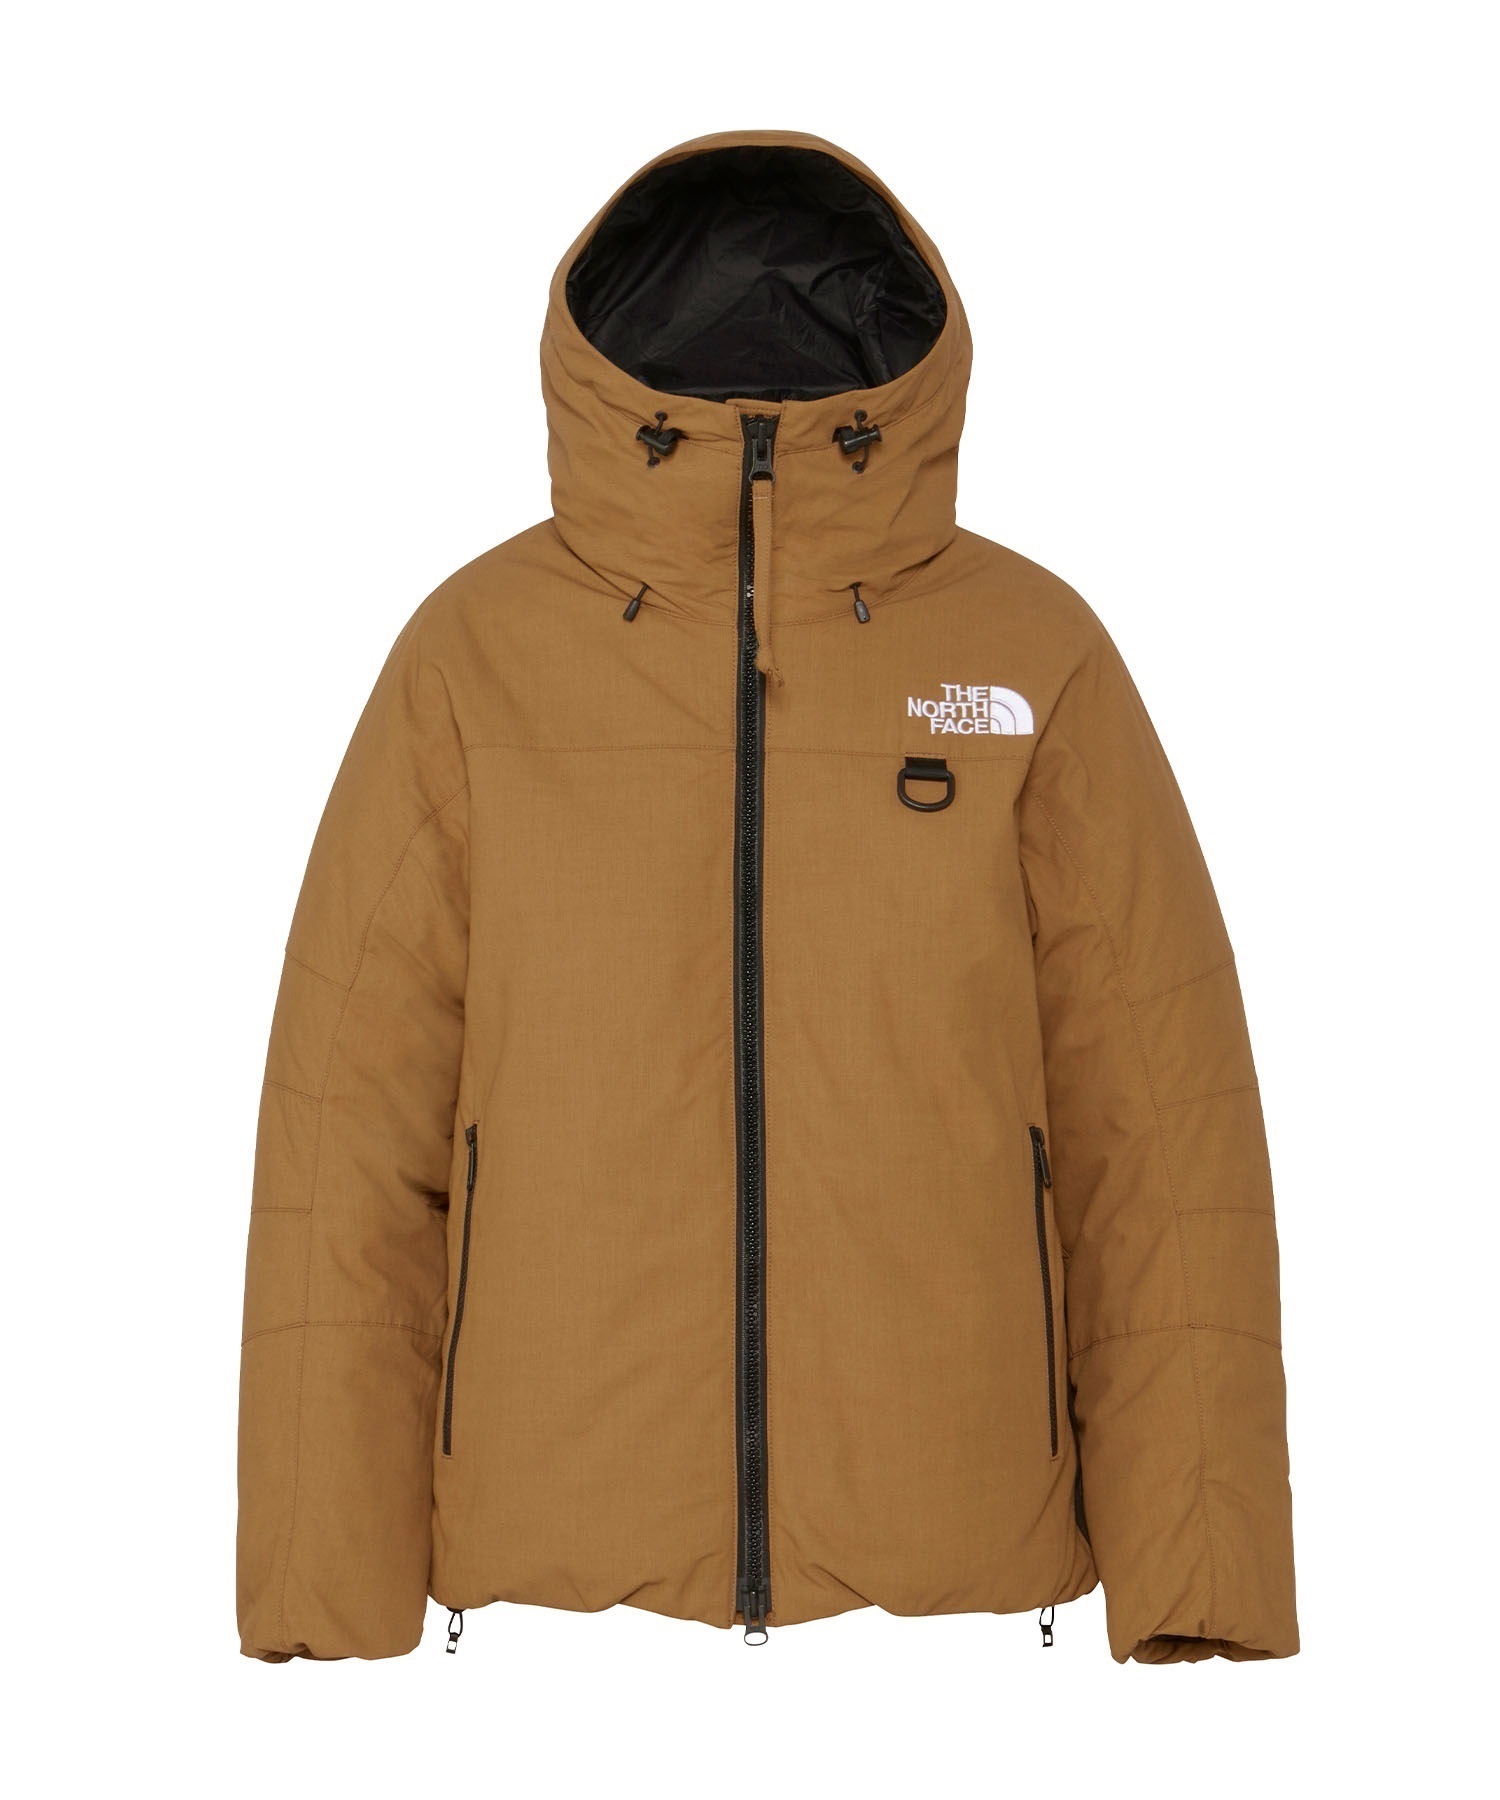 THE NORTH FACE/ノース・フェイス FIREFLY INSULATED PARKA ファイヤー